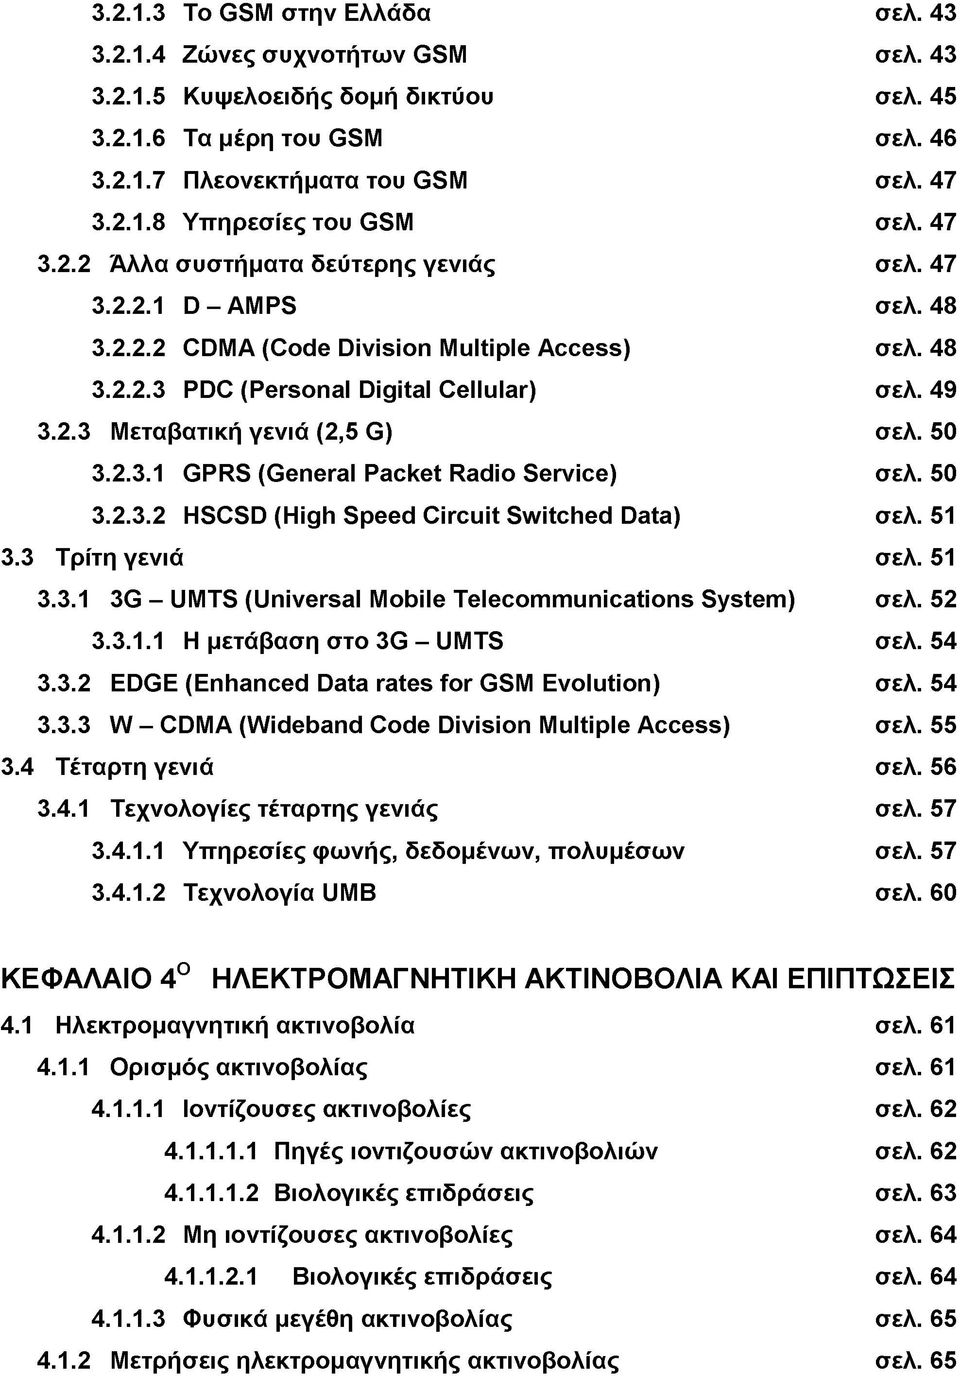 50 3.2.3.1 GPRS (General Packet Radio Service) σελ. 50 3.2.3.2 HSCSD (High Speed Circuit Switched Data) σελ. 51 3.3 Τρίτη γενιά σελ. 51 3.3.1 3G - UMTS (Universal Mobile Telecommunications System) σελ.